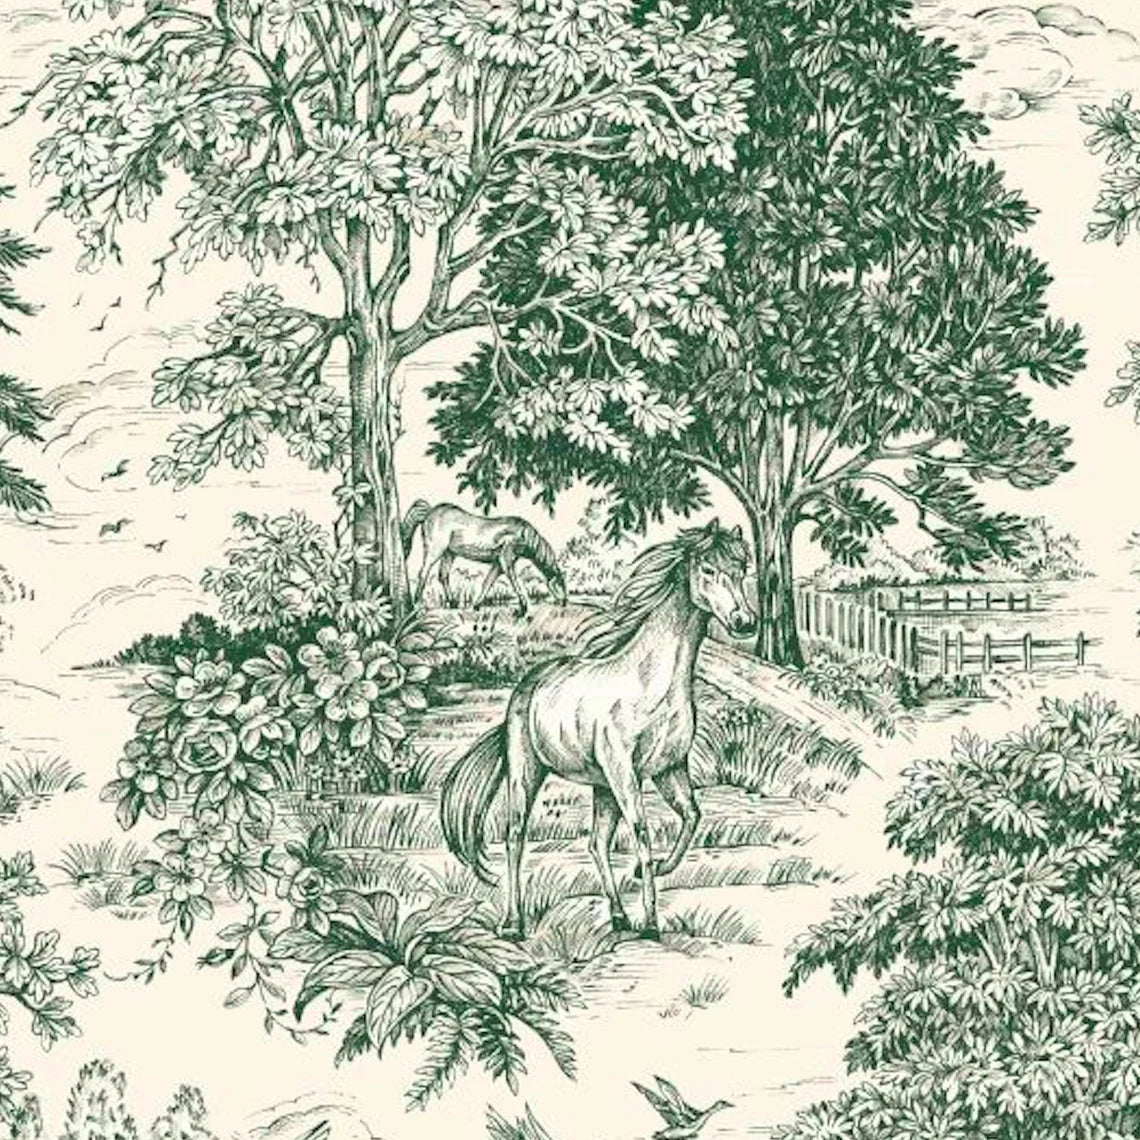 Tailored Bedskirt in Yellowstone Classic Green Country Toile- Horses, Deer, Dogs- Large Scale